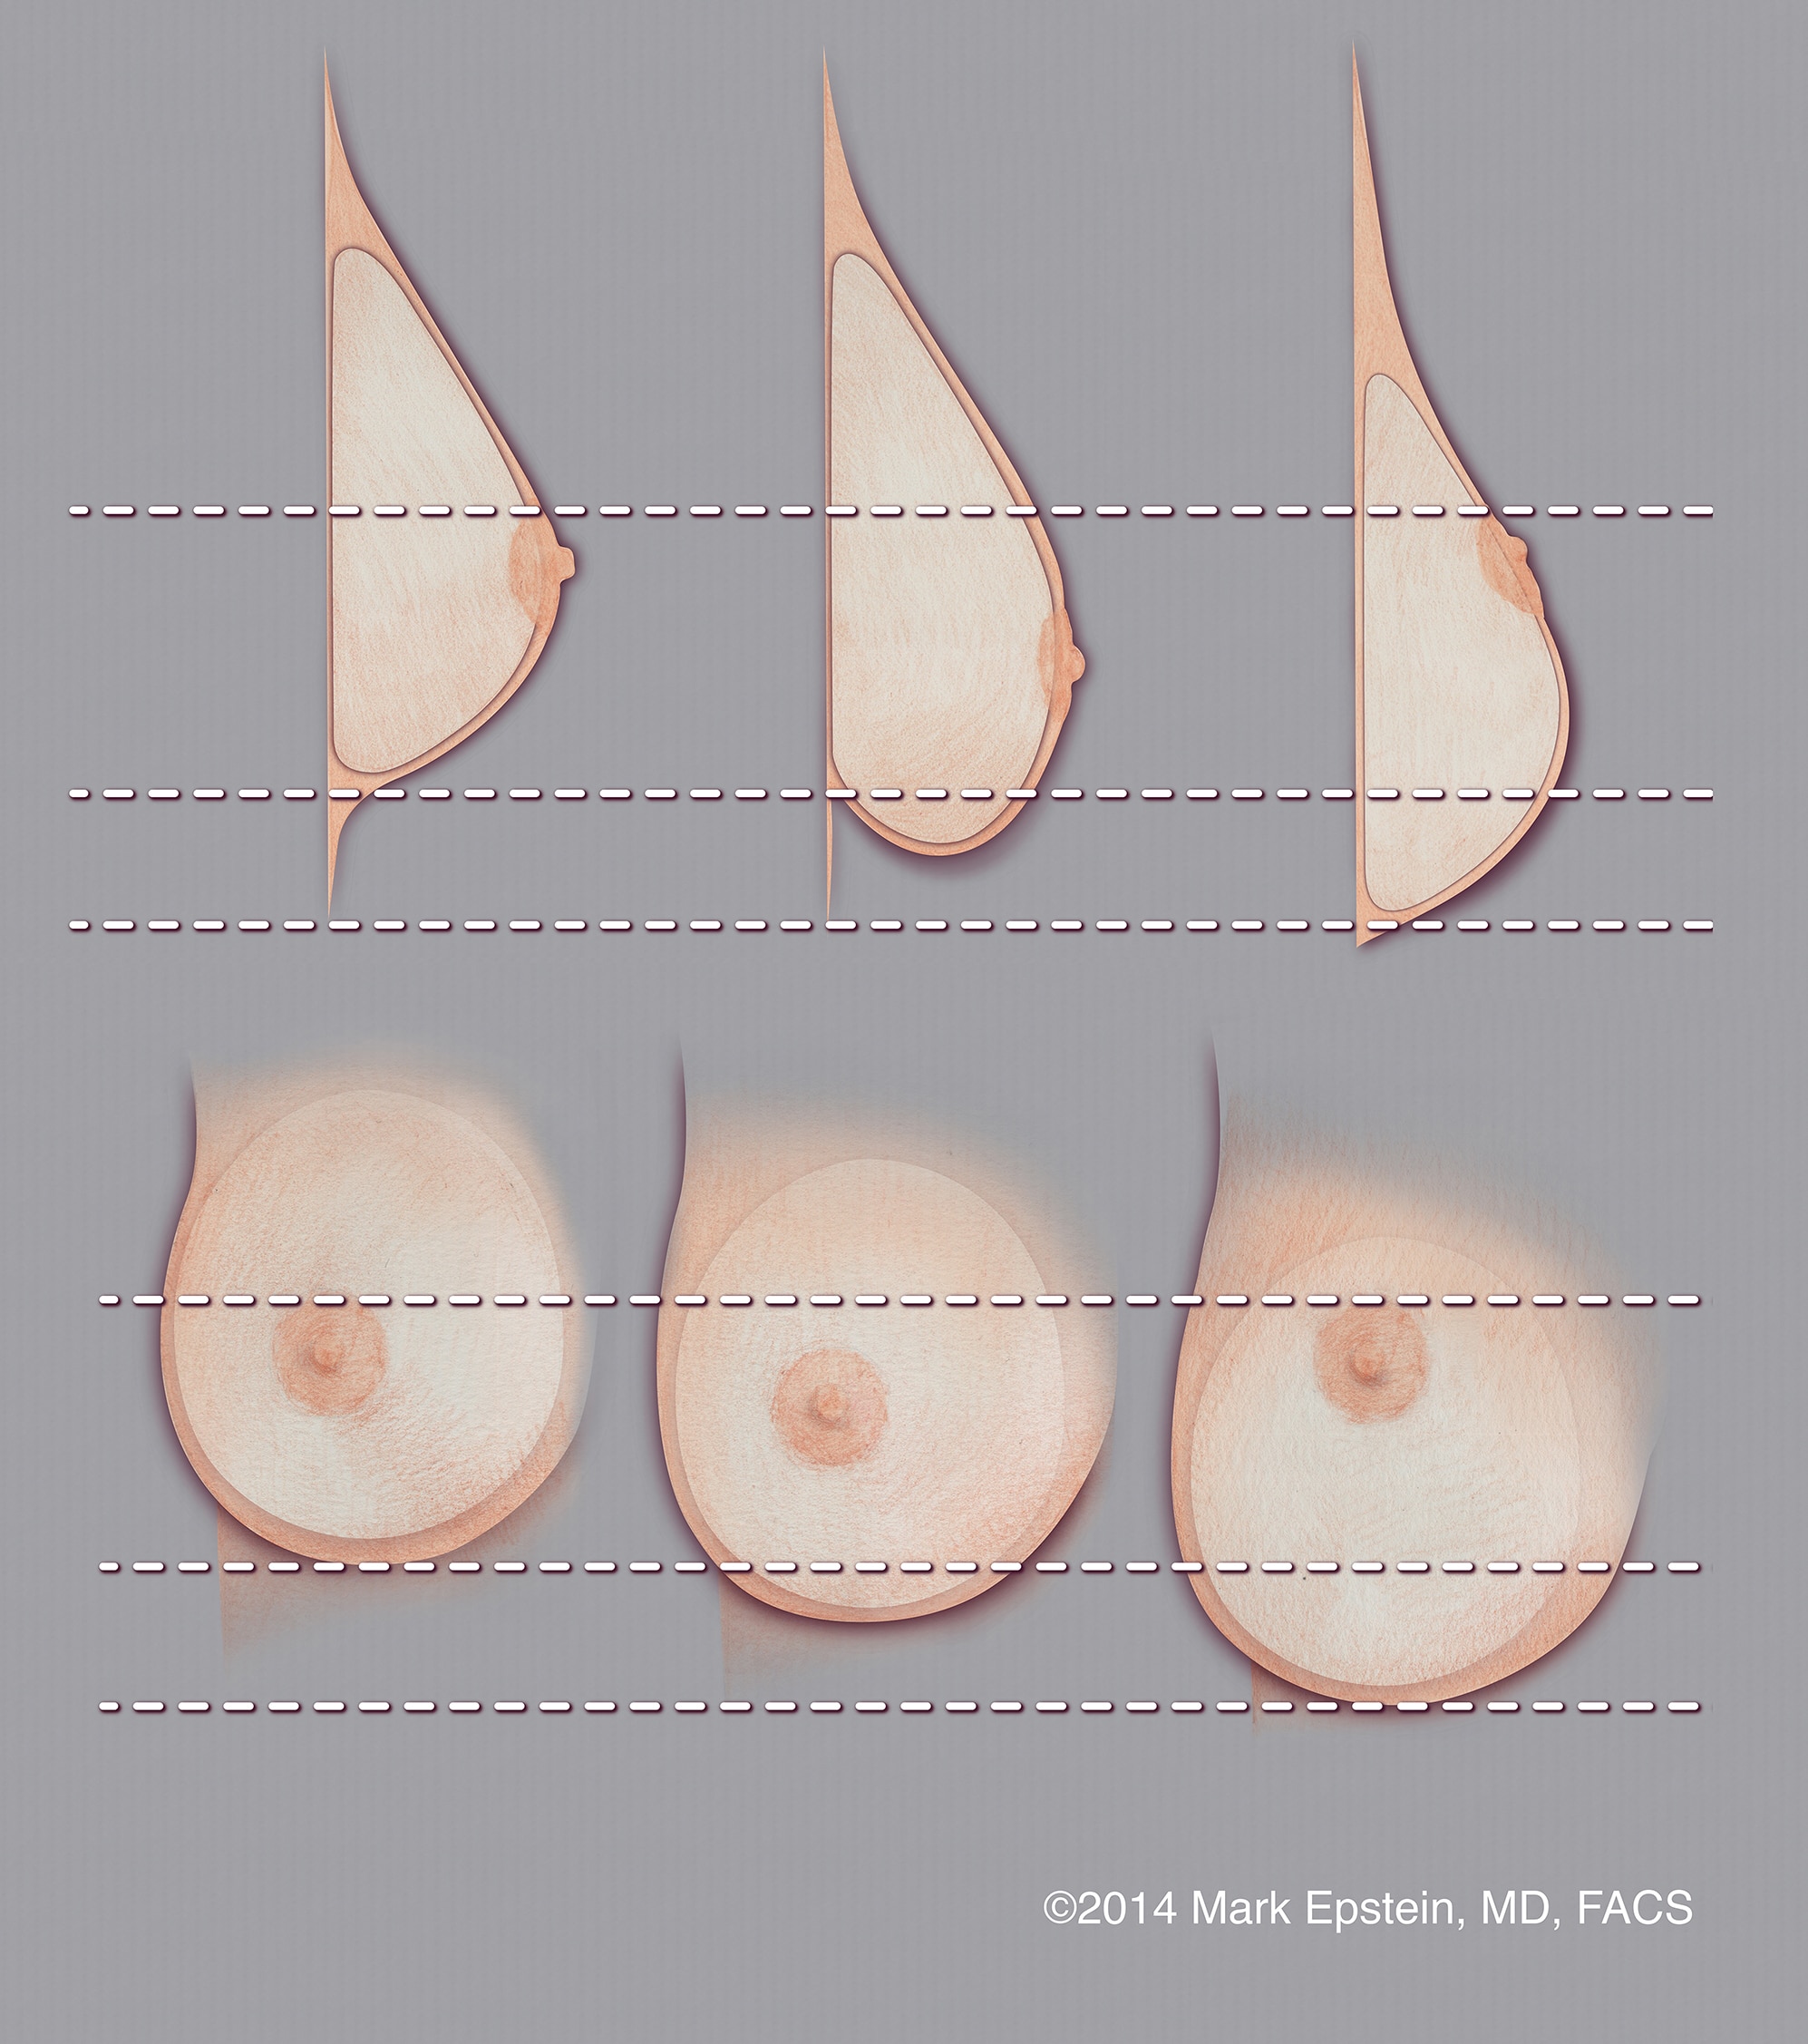 Small pointy breasts- want to fix shape but avoid implants and